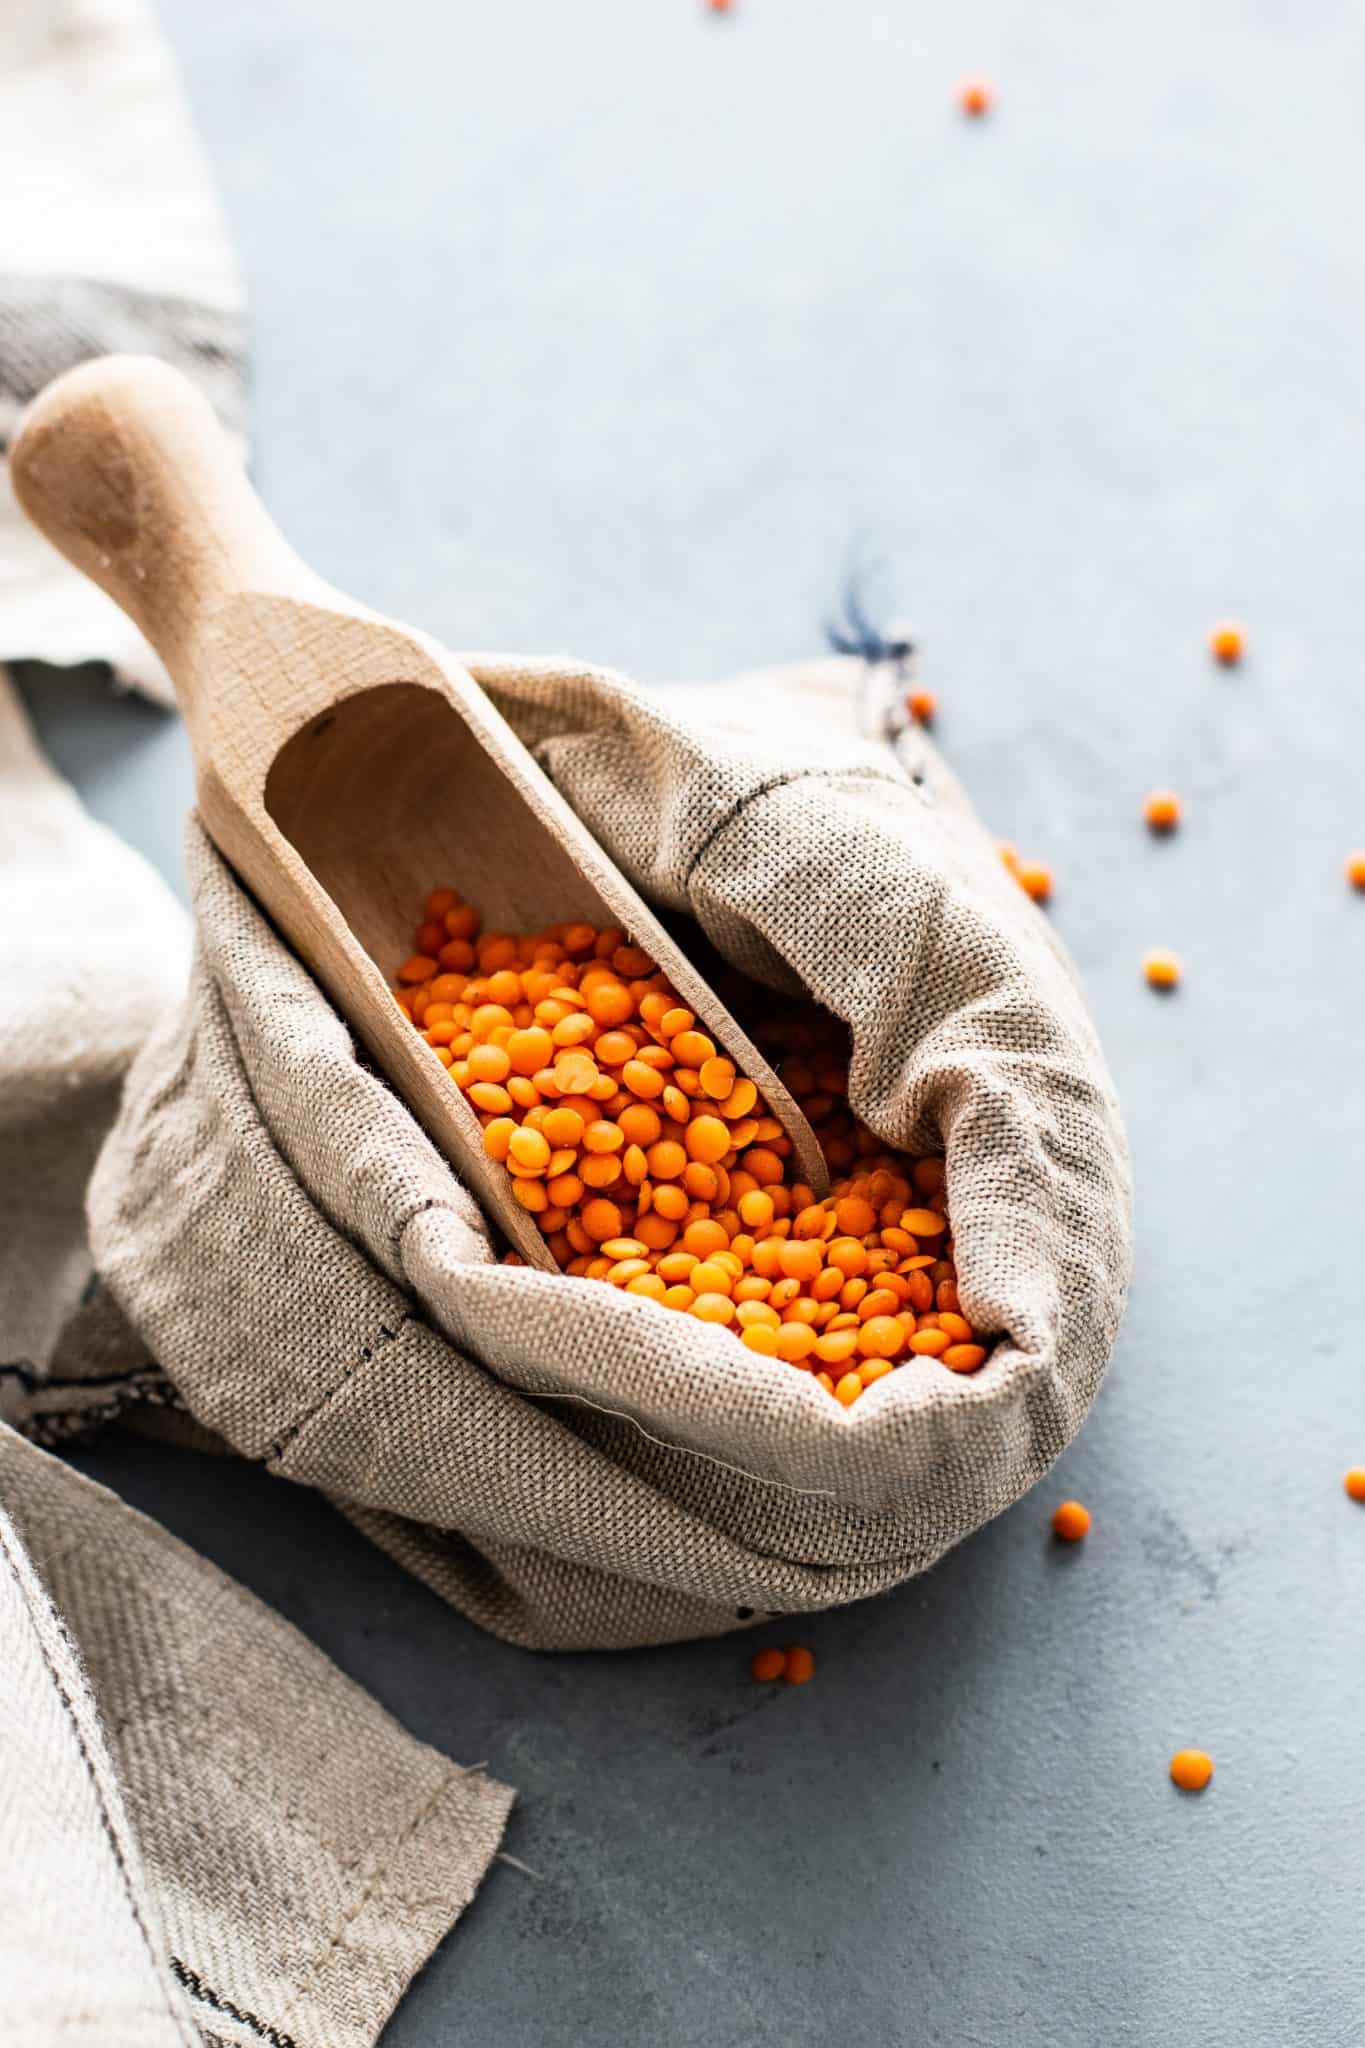 Lentils are a good source of iron for heart health